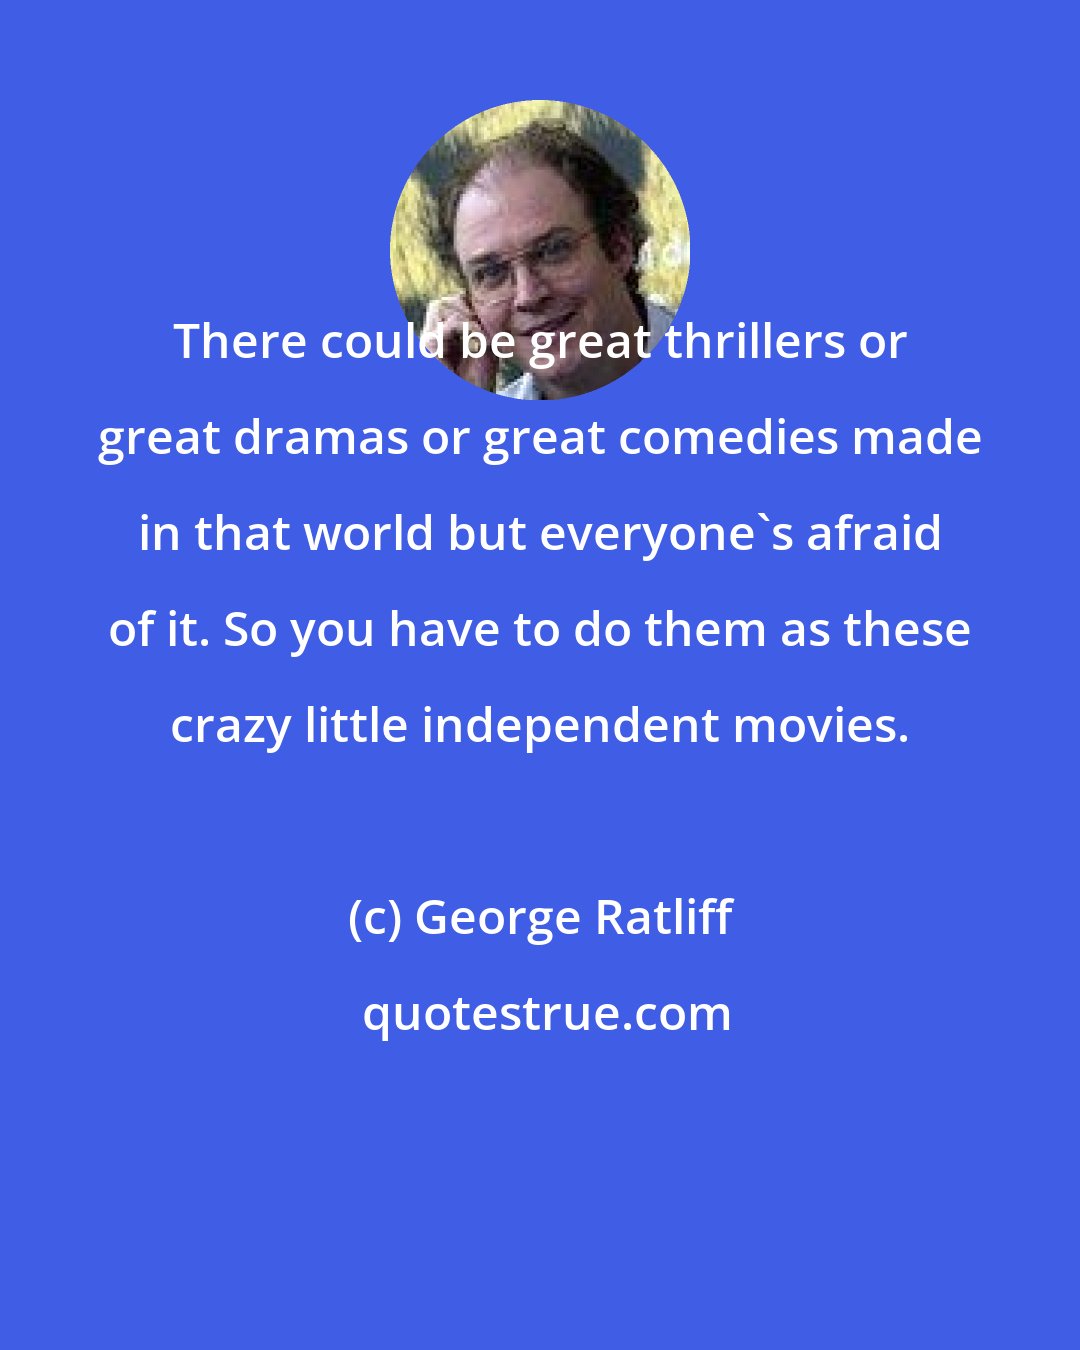 George Ratliff: There could be great thrillers or great dramas or great comedies made in that world but everyone's afraid of it. So you have to do them as these crazy little independent movies.